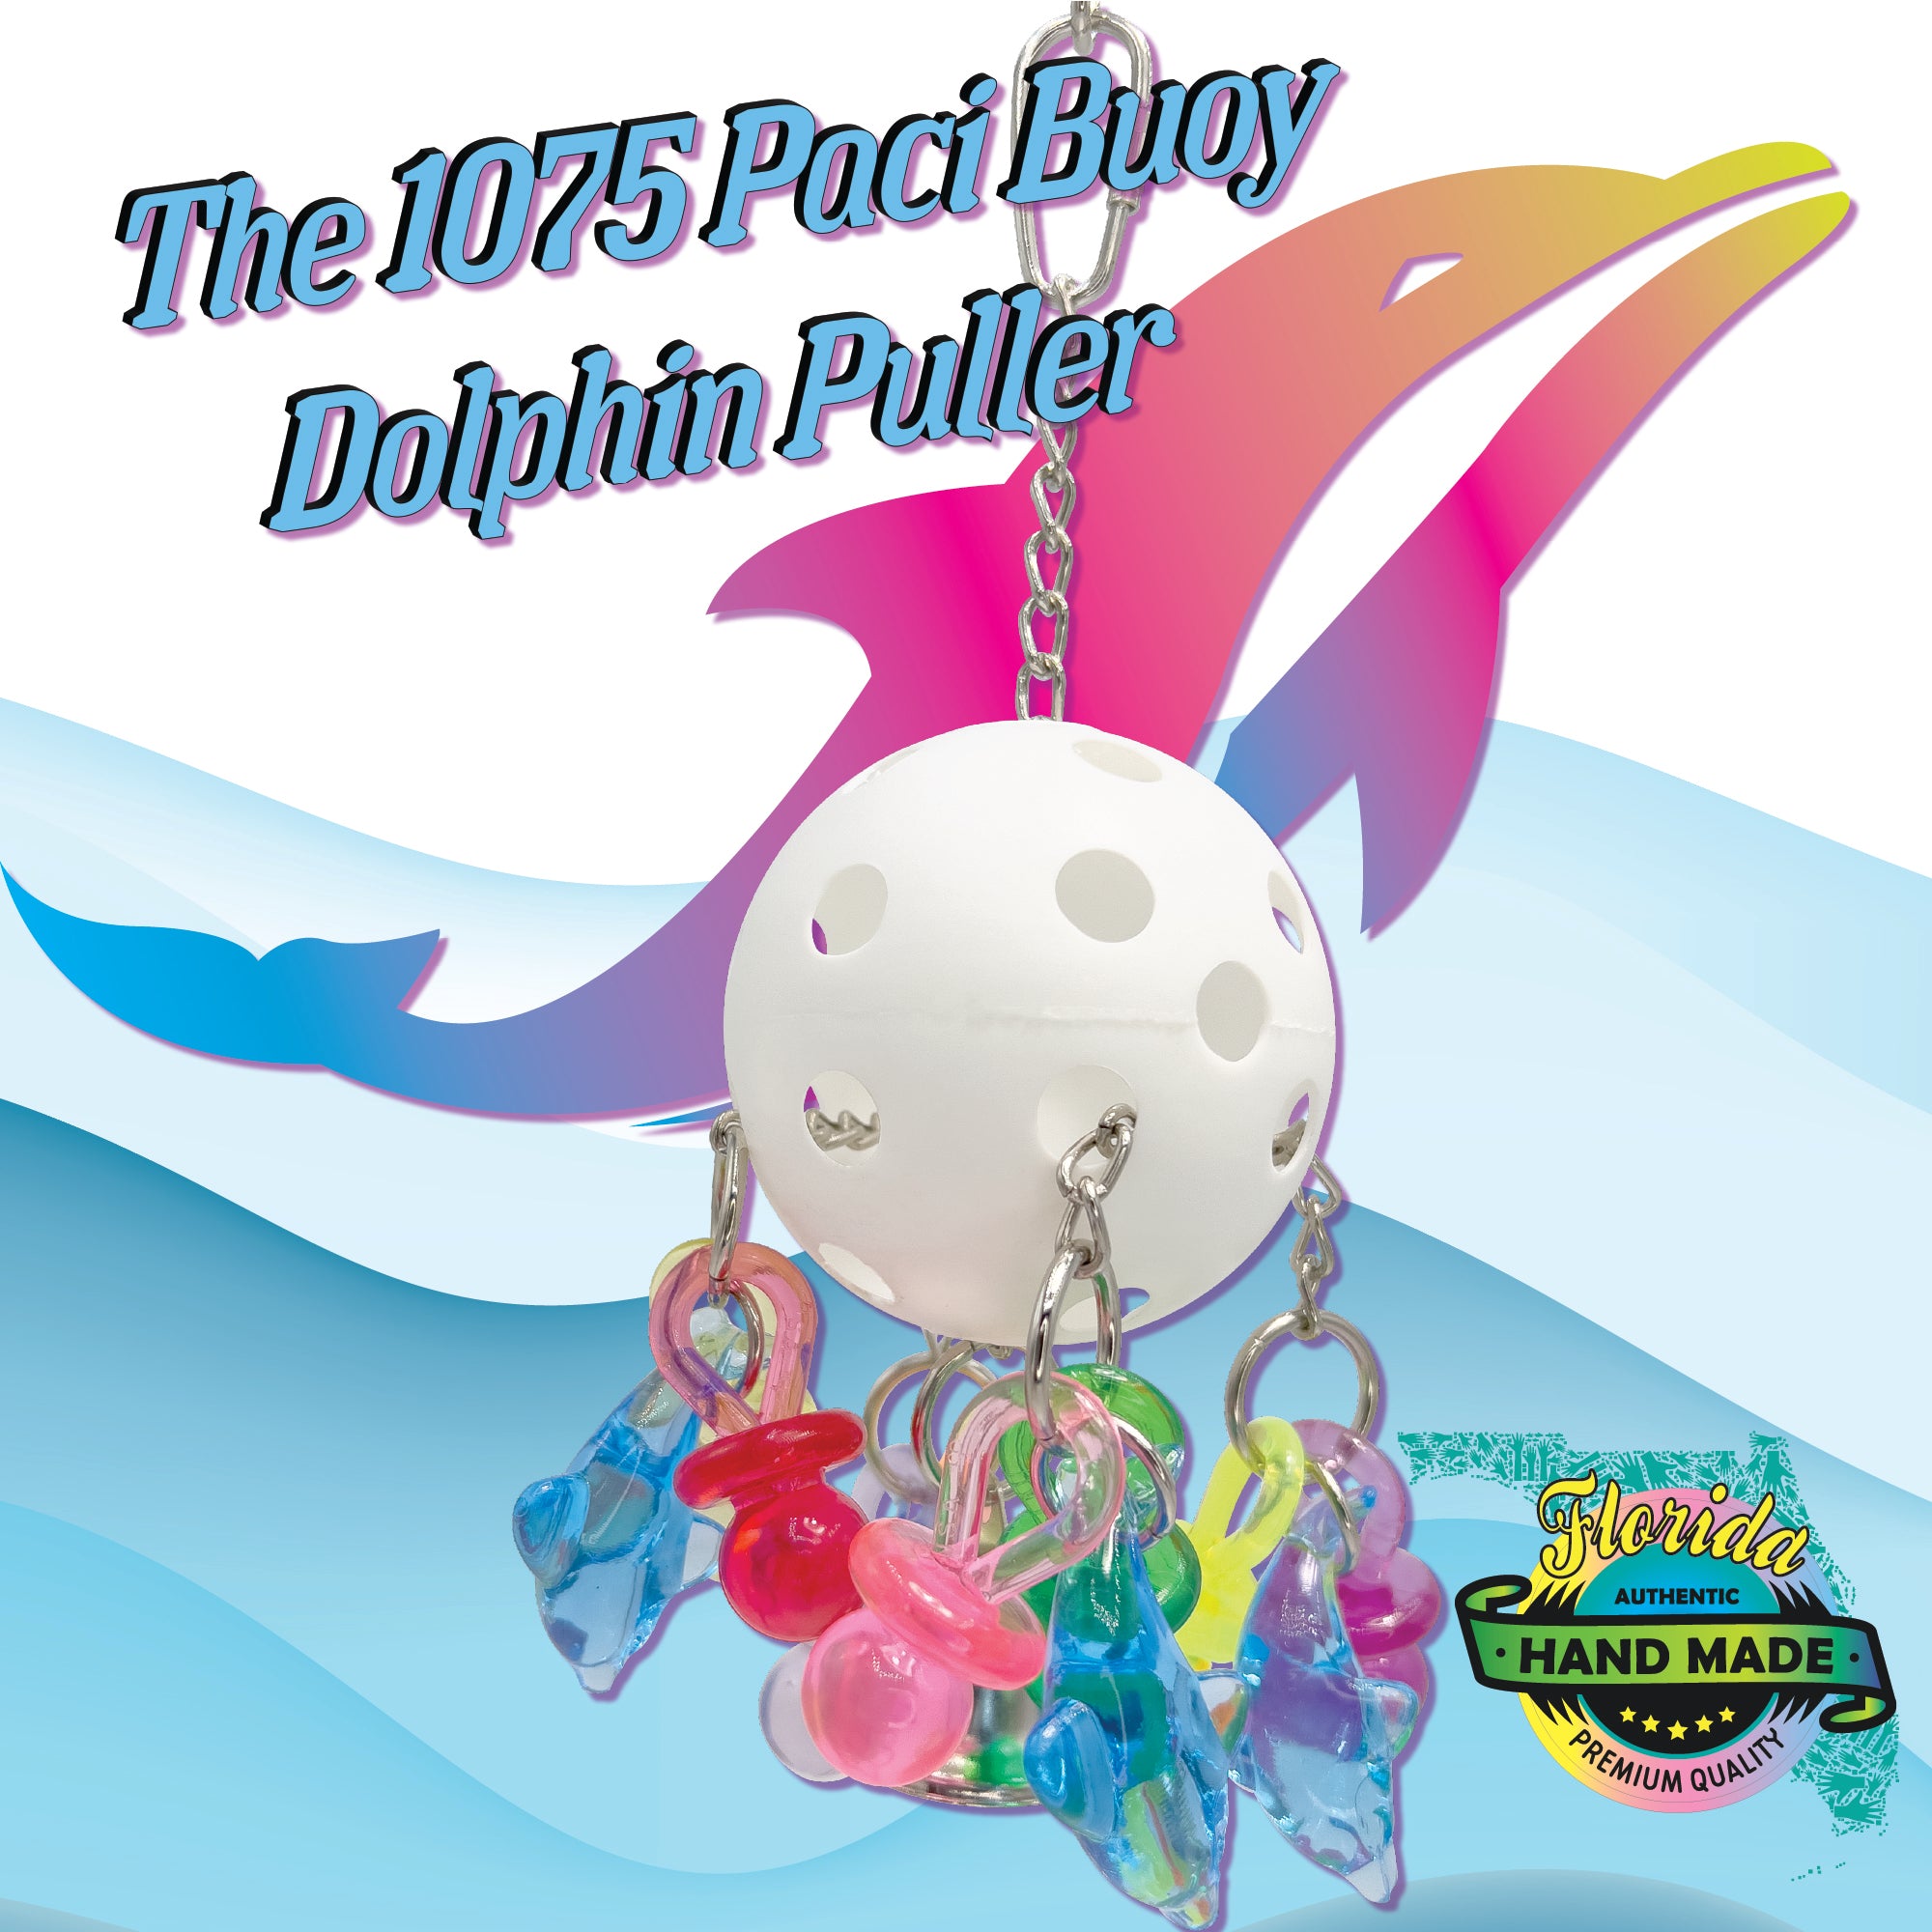 1075 Paci Buoy Dolphin Puller